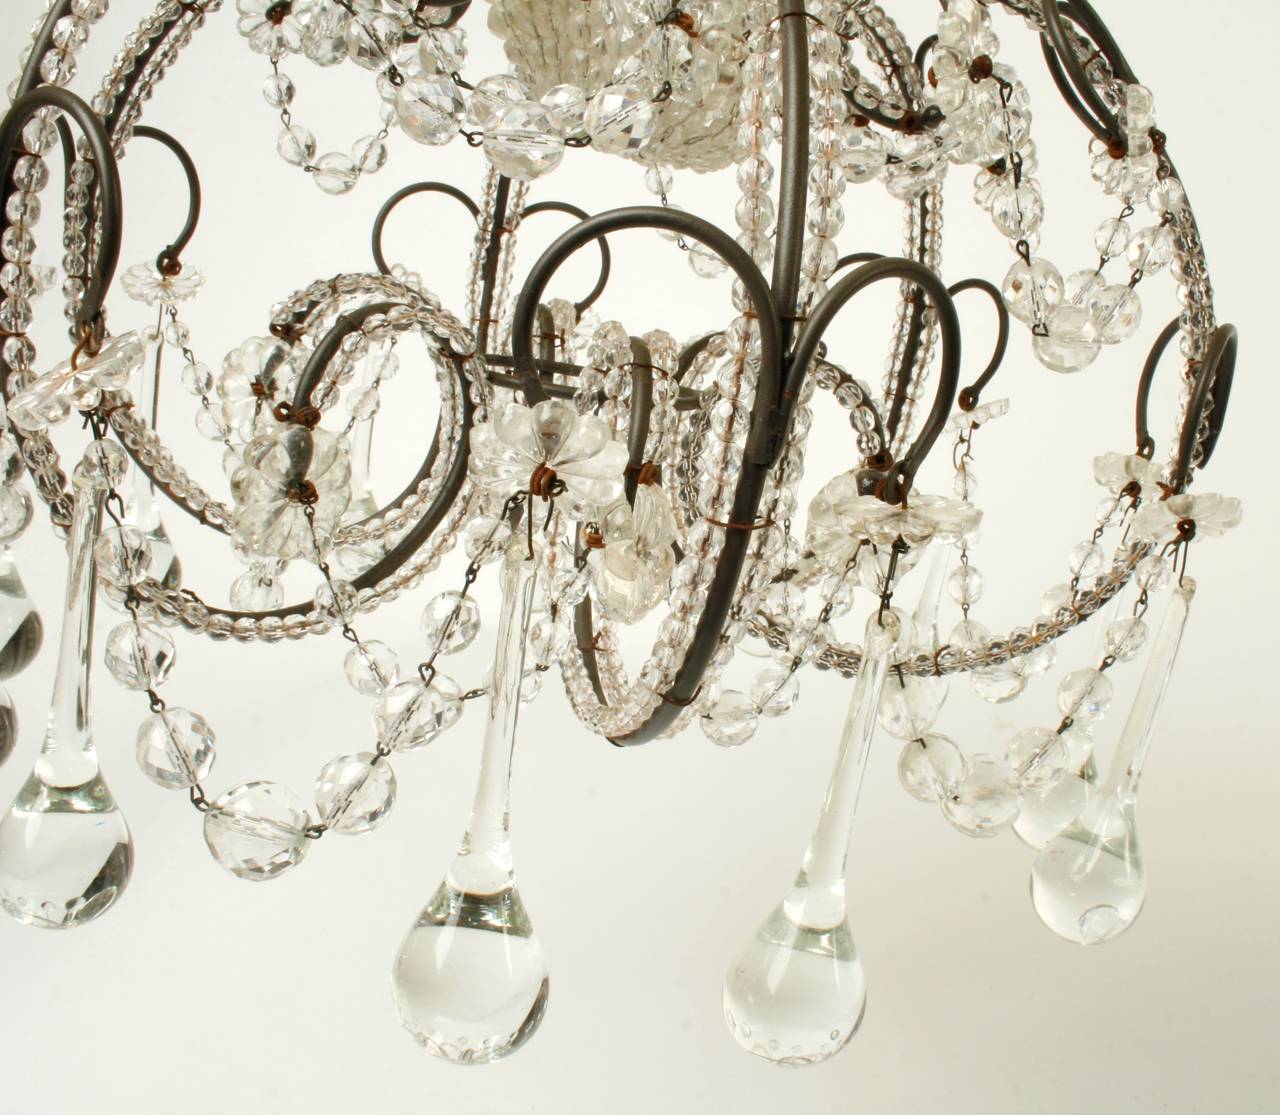 This pretty French crystal chandelier has a scrolled metal frame with varied tear drop and floral crystals. The frame is covered in linked faceted crystal beads, graduated swags and a removable crystal light bulb sock. A pretty touch for a smaller